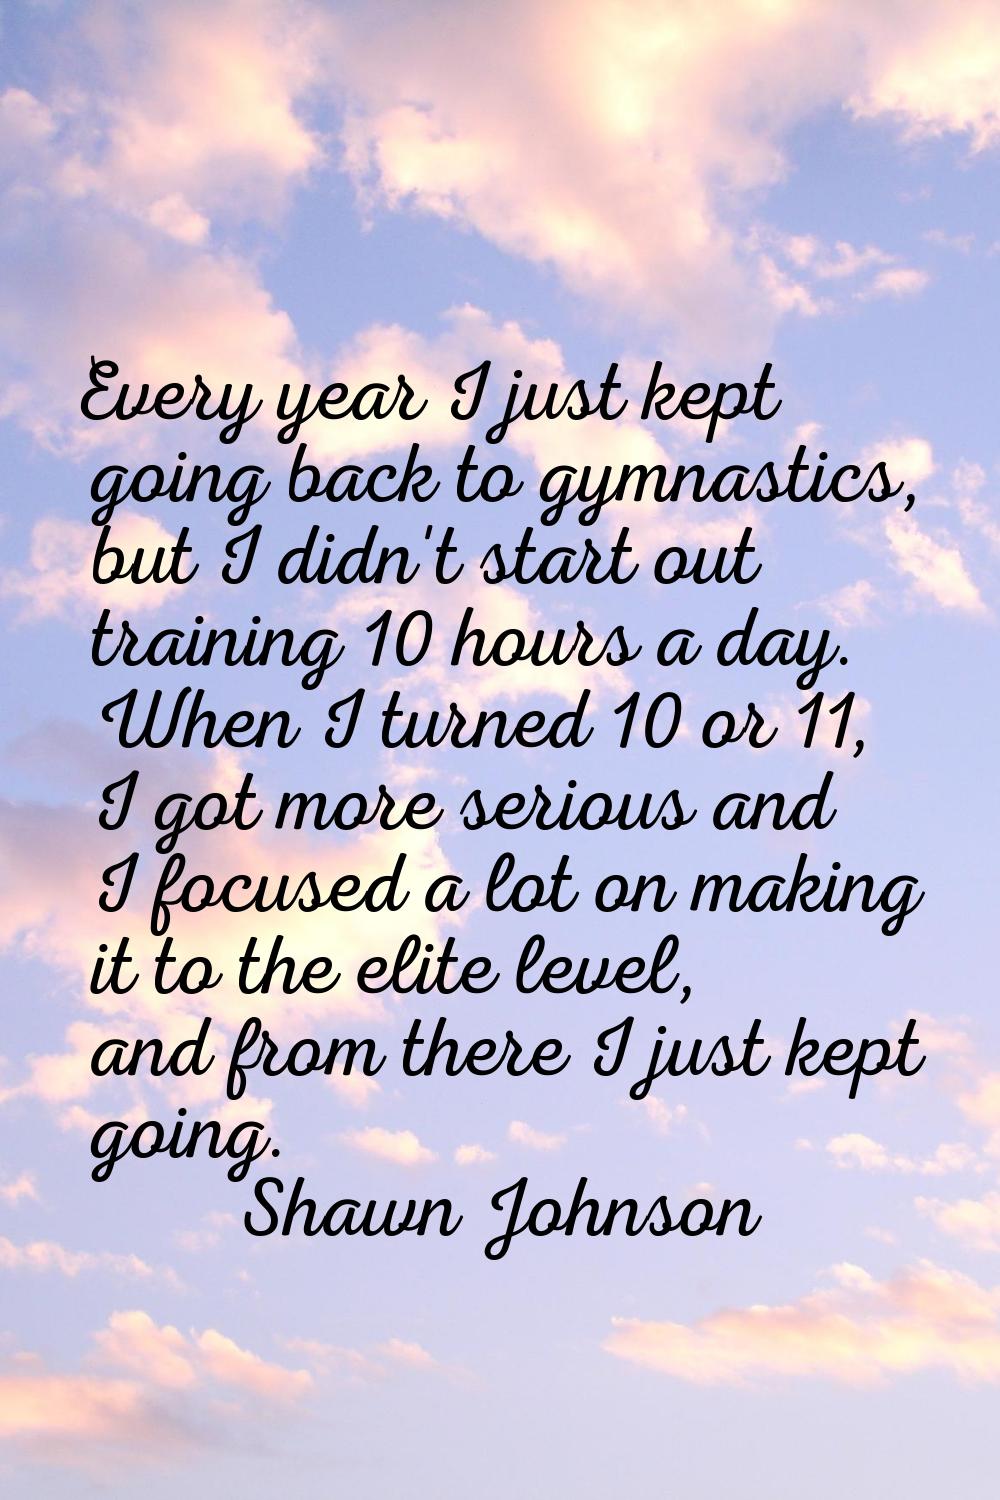 Every year I just kept going back to gymnastics, but I didn't start out training 10 hours a day. Wh